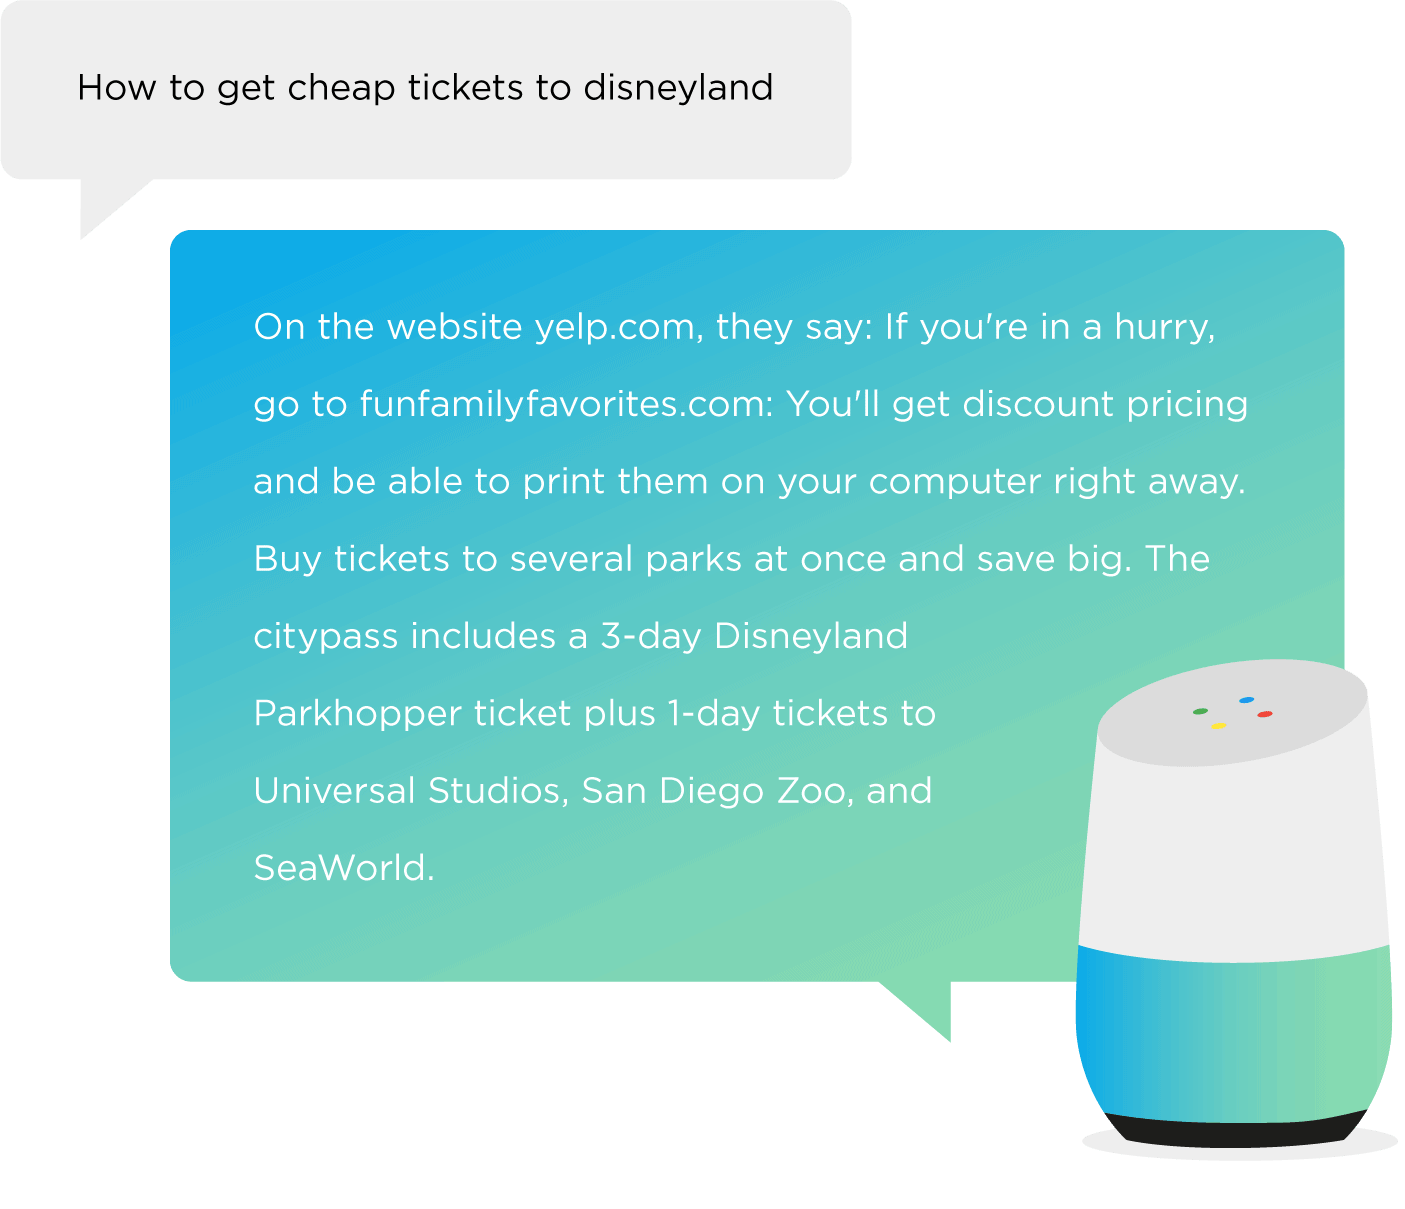 Google Home – Question/Answer